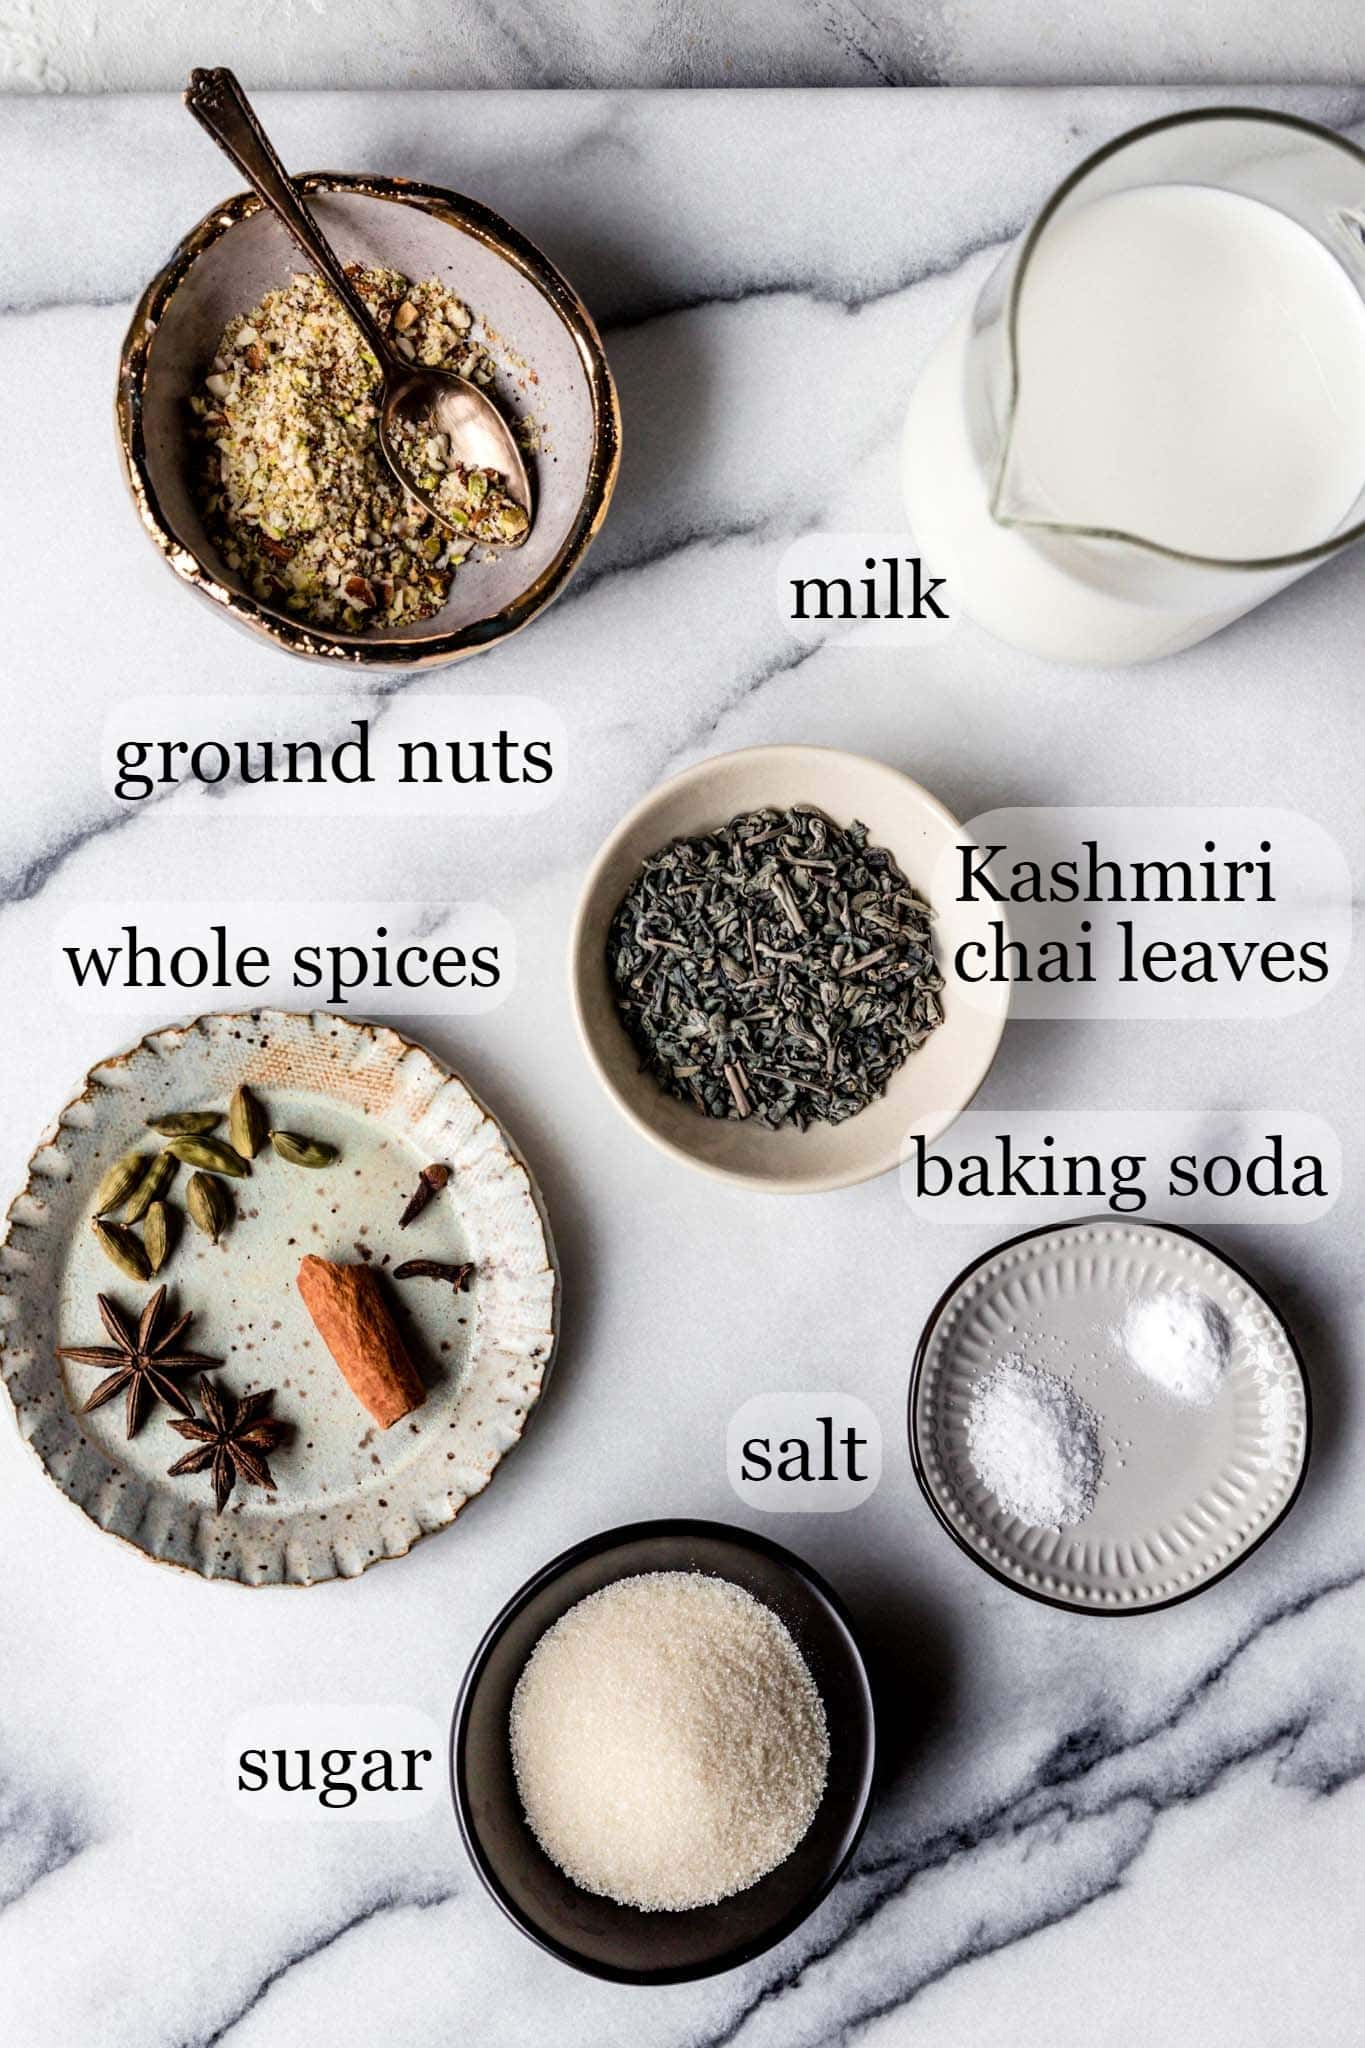 Marble top with milk, half and half, spices, tea leaves, baking soda, salt and sugar for making Kashmiri Chai (pink tea)